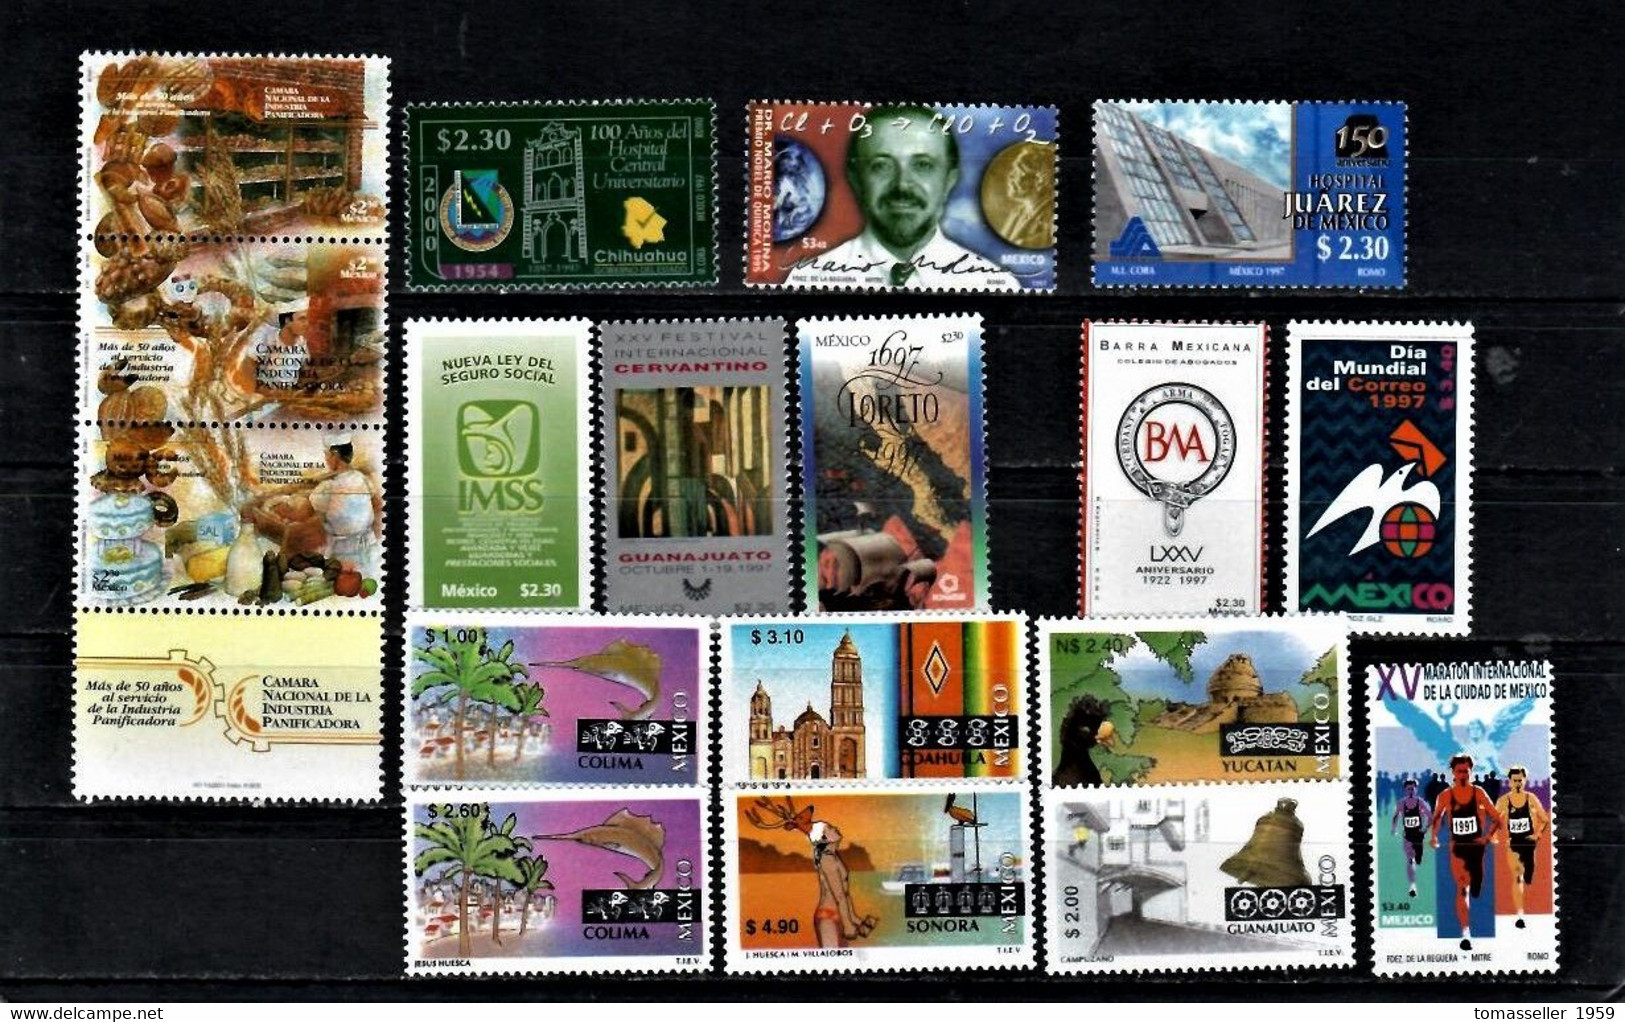 MEXICO-7 !!! Year (1993-1999) sets. MNH.Almost 280 issues